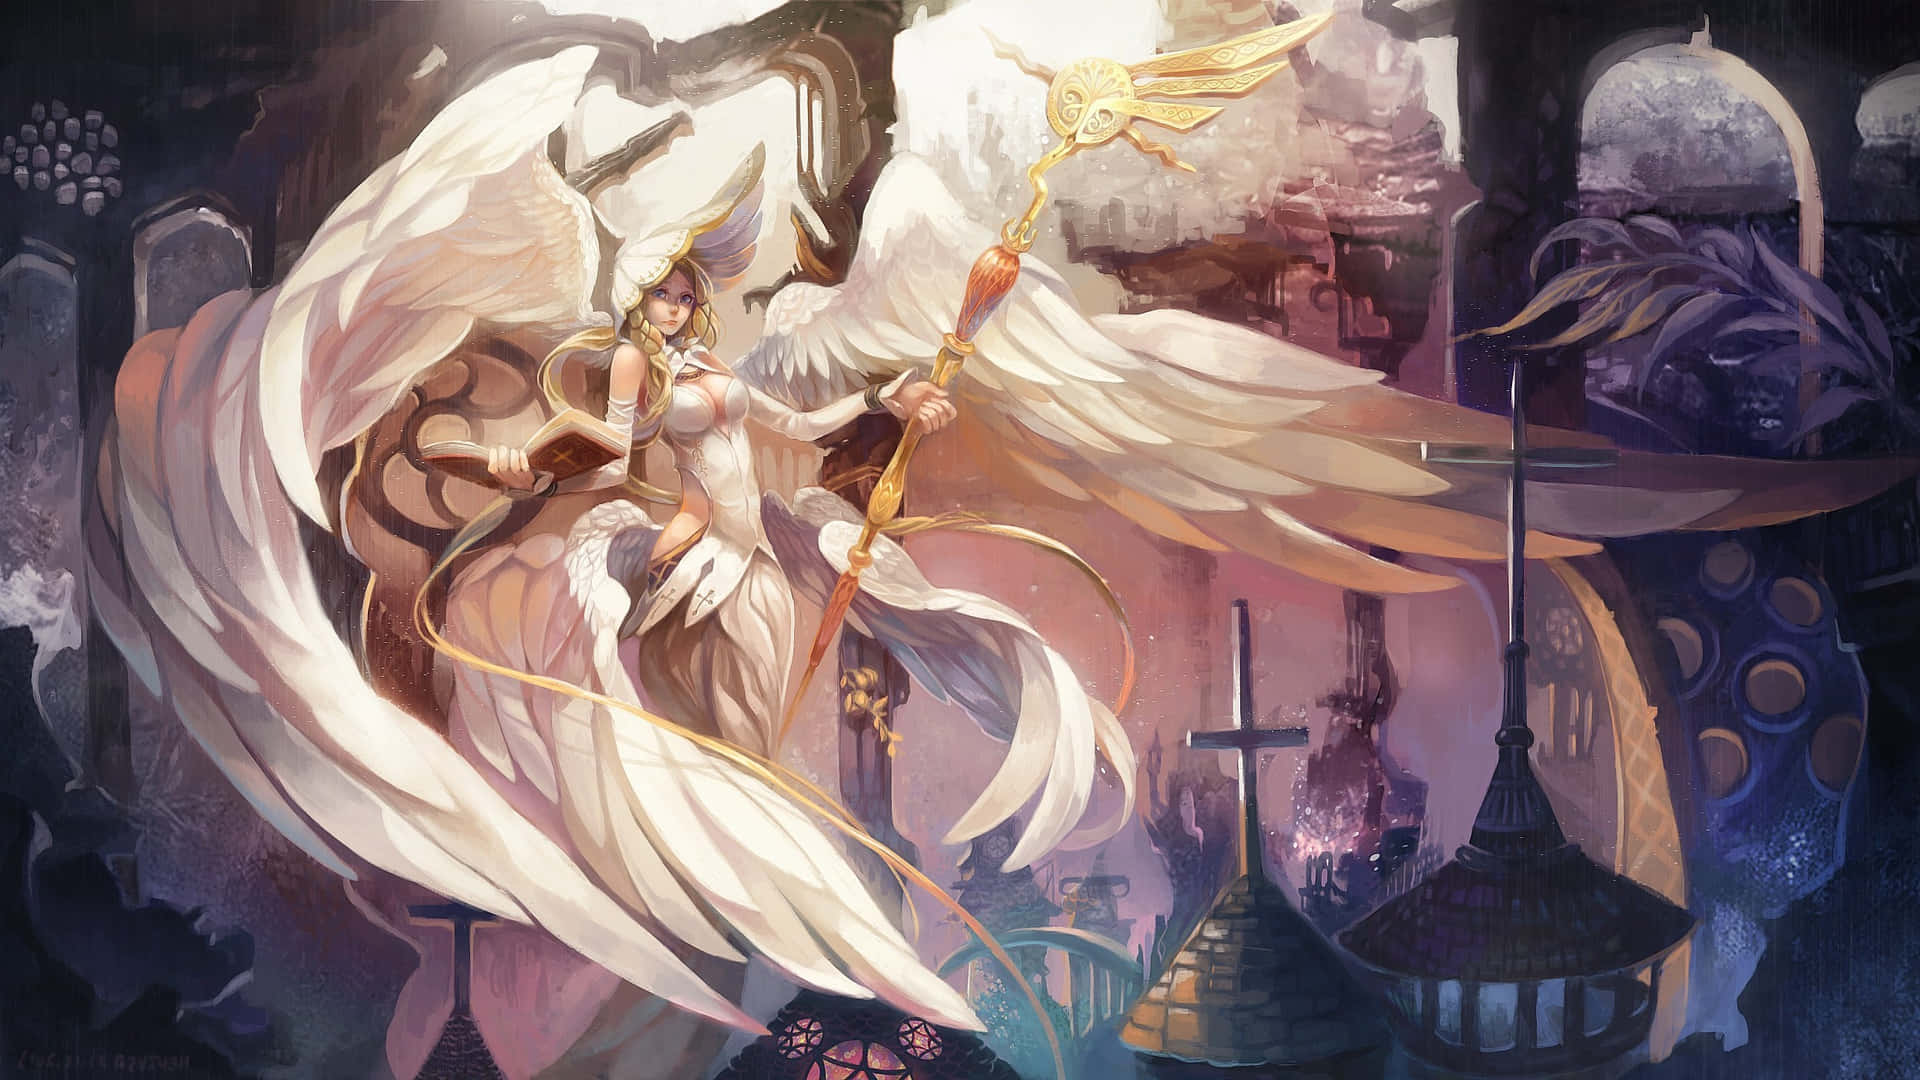 A White Angel With A Sword In Her Hand